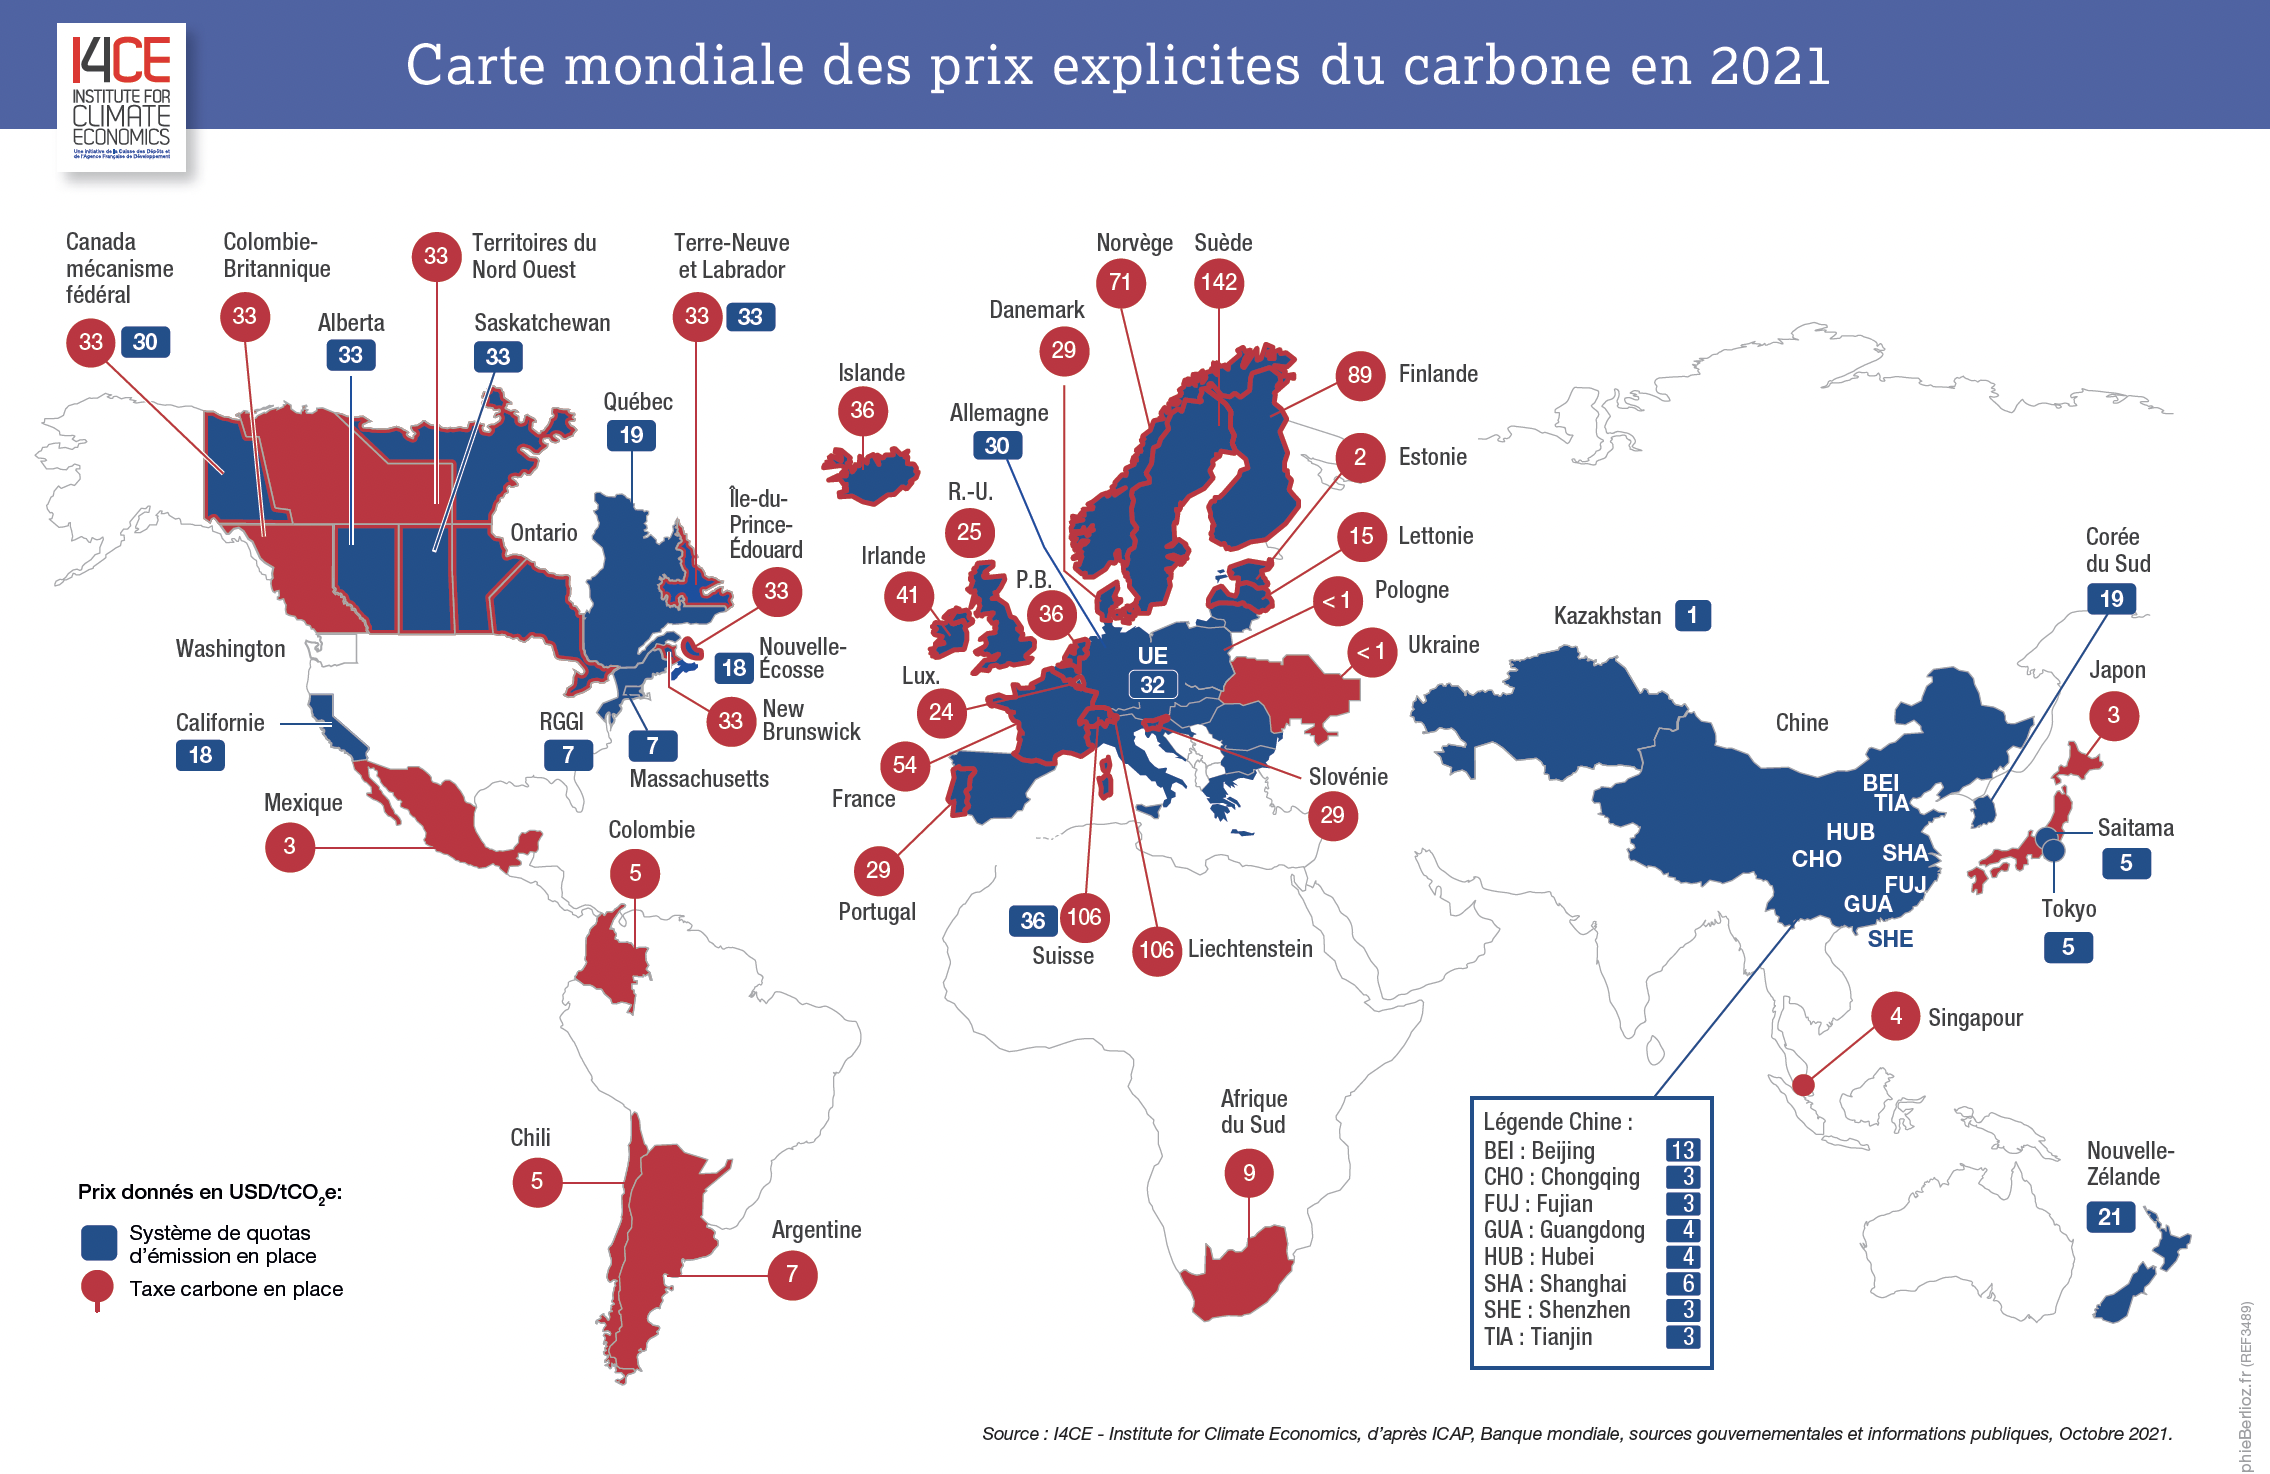 co2, carbon pricing